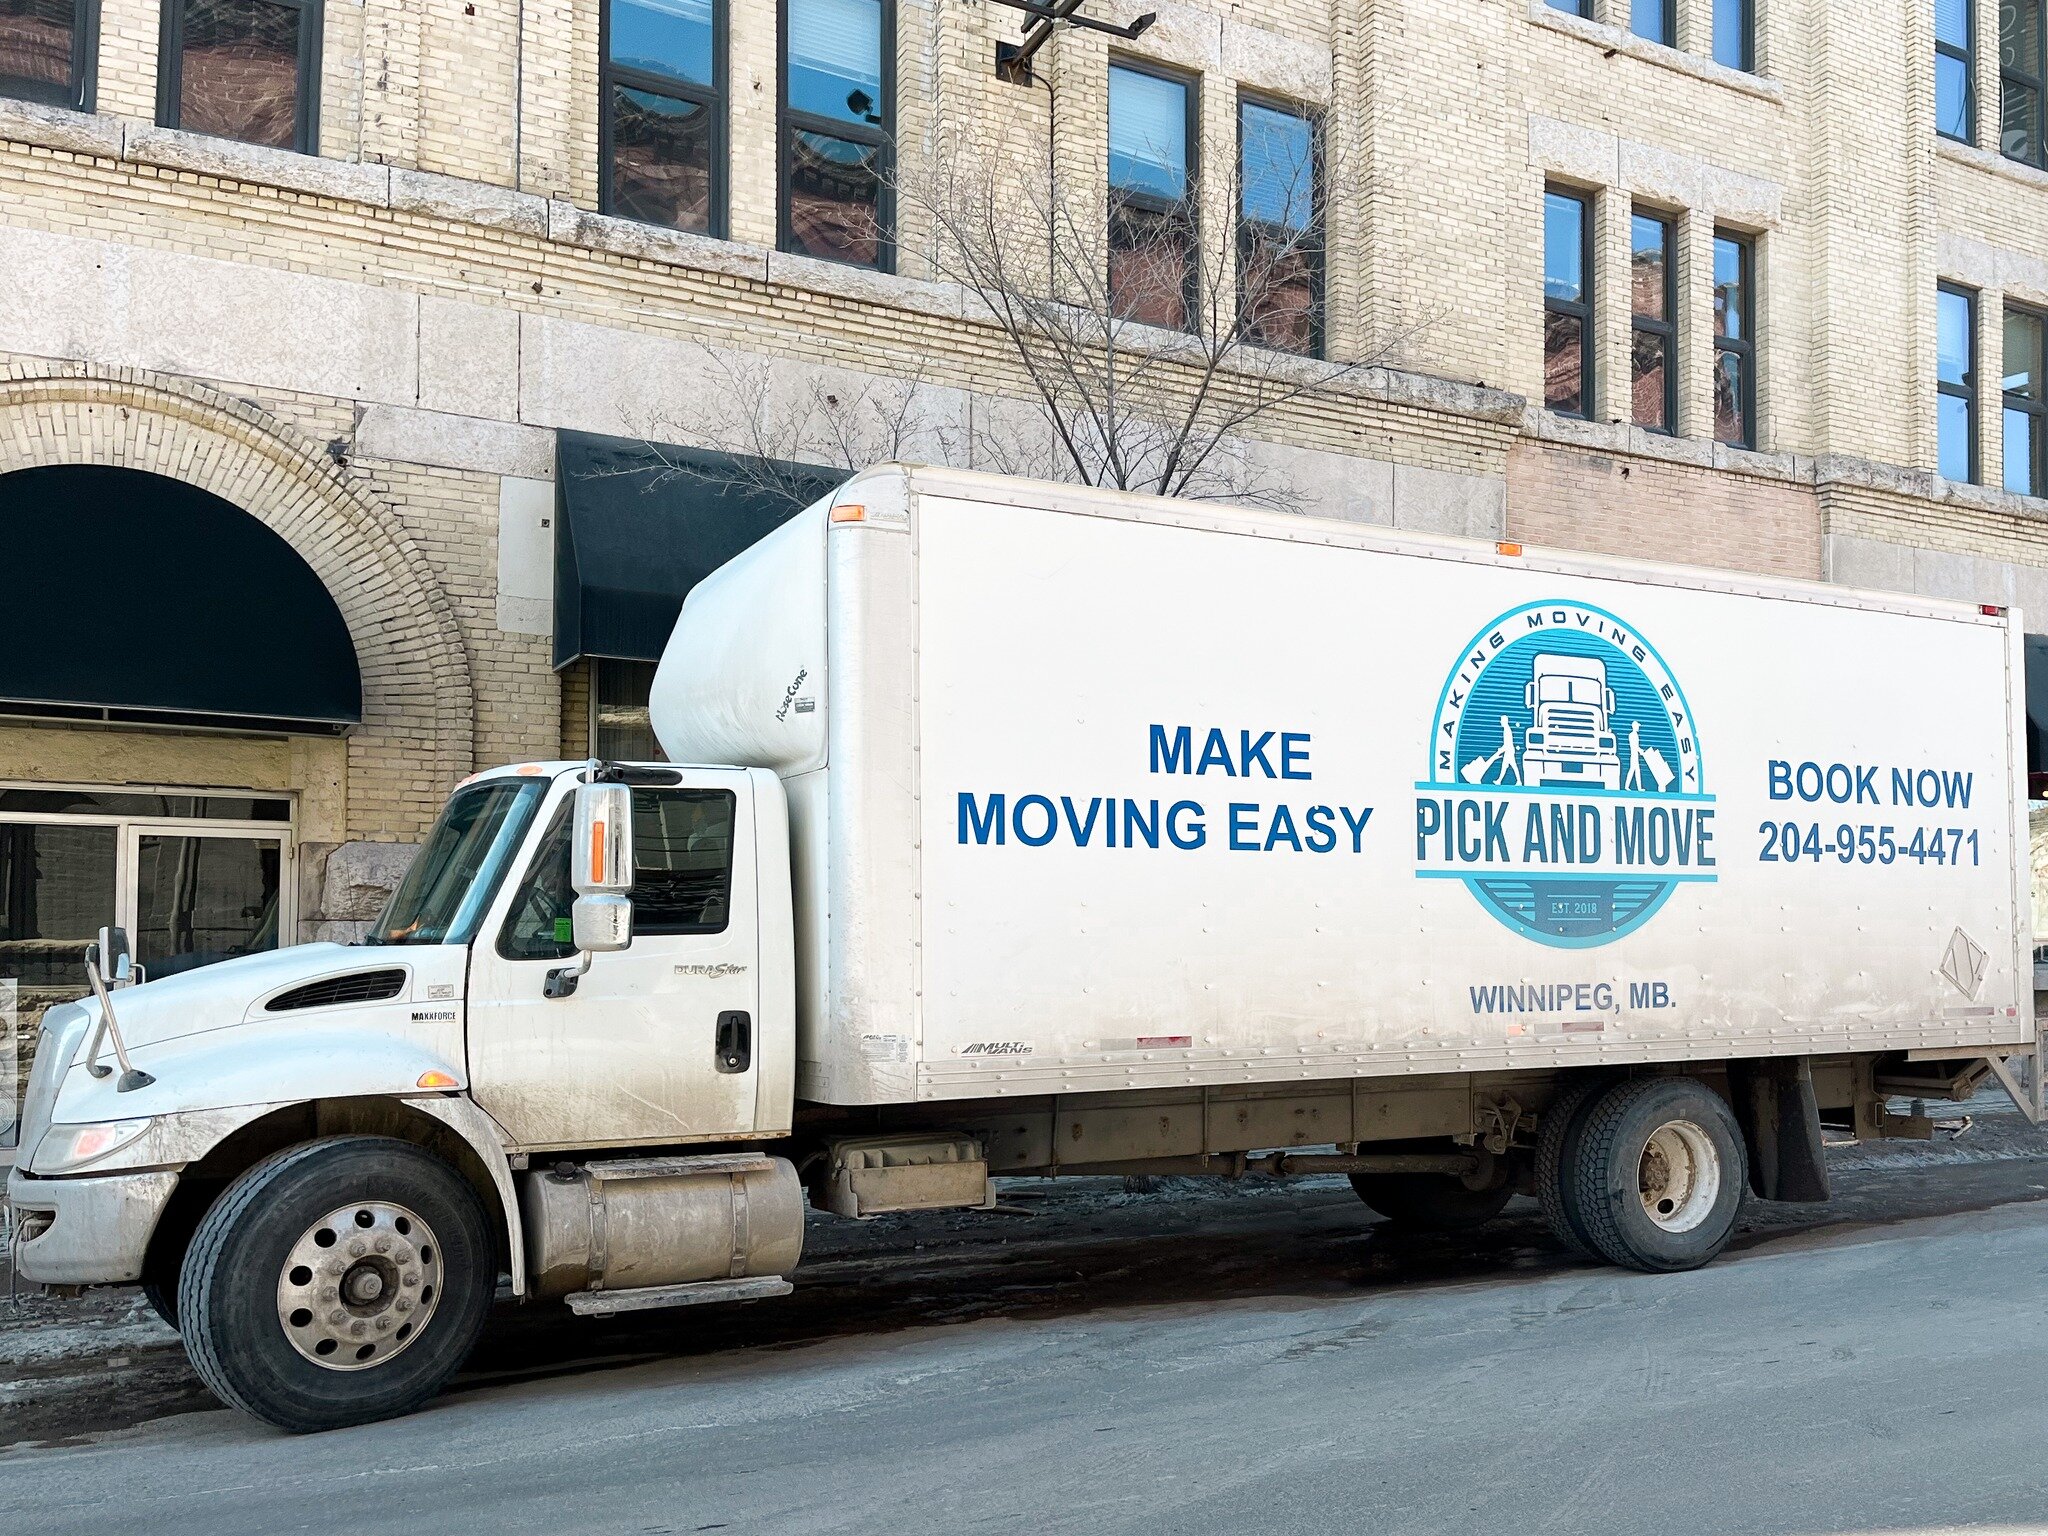 We're not just a moving company, we're your partners in your new chapter of life. Let us help you make a smooth transition to your new home. 🤝

Our experienced movers are equipped with the right tools and equipment to handle any move, big or small. 